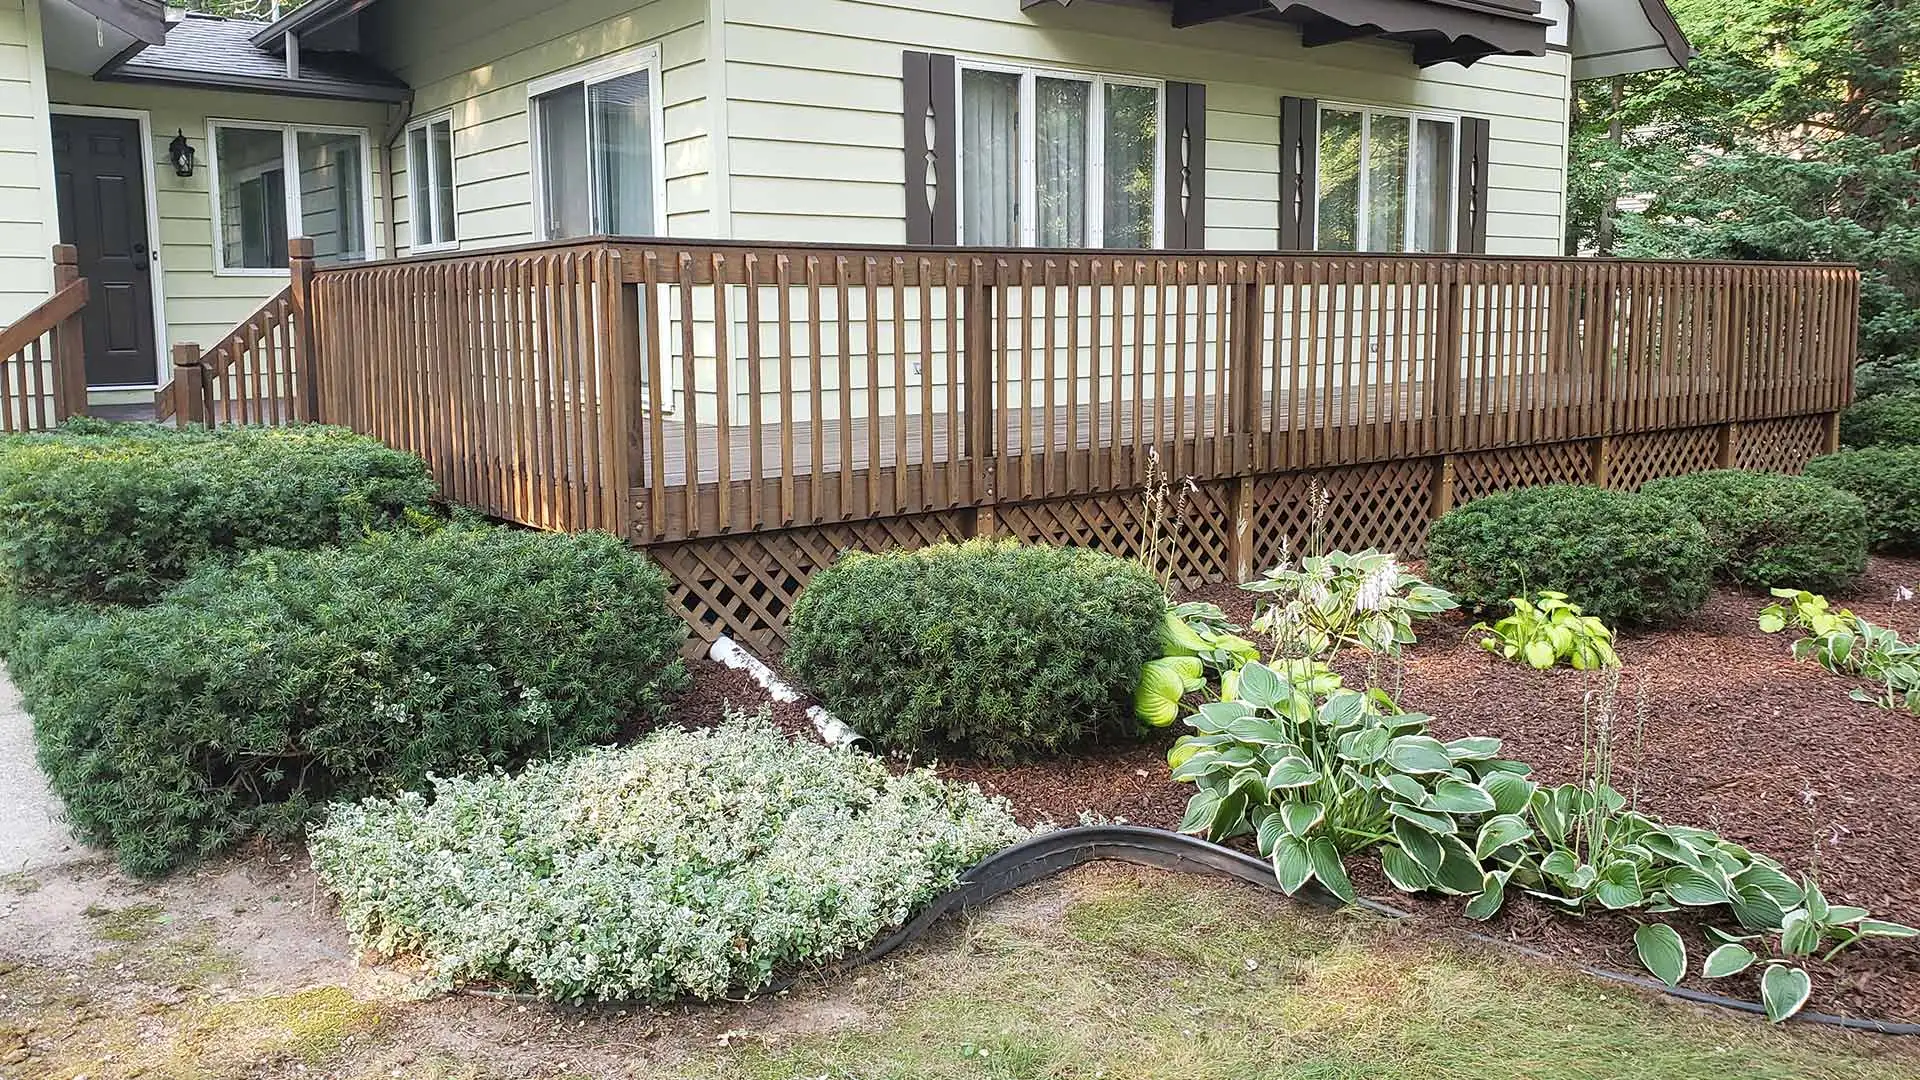 Neatly trimmed bushes in landscape beds.